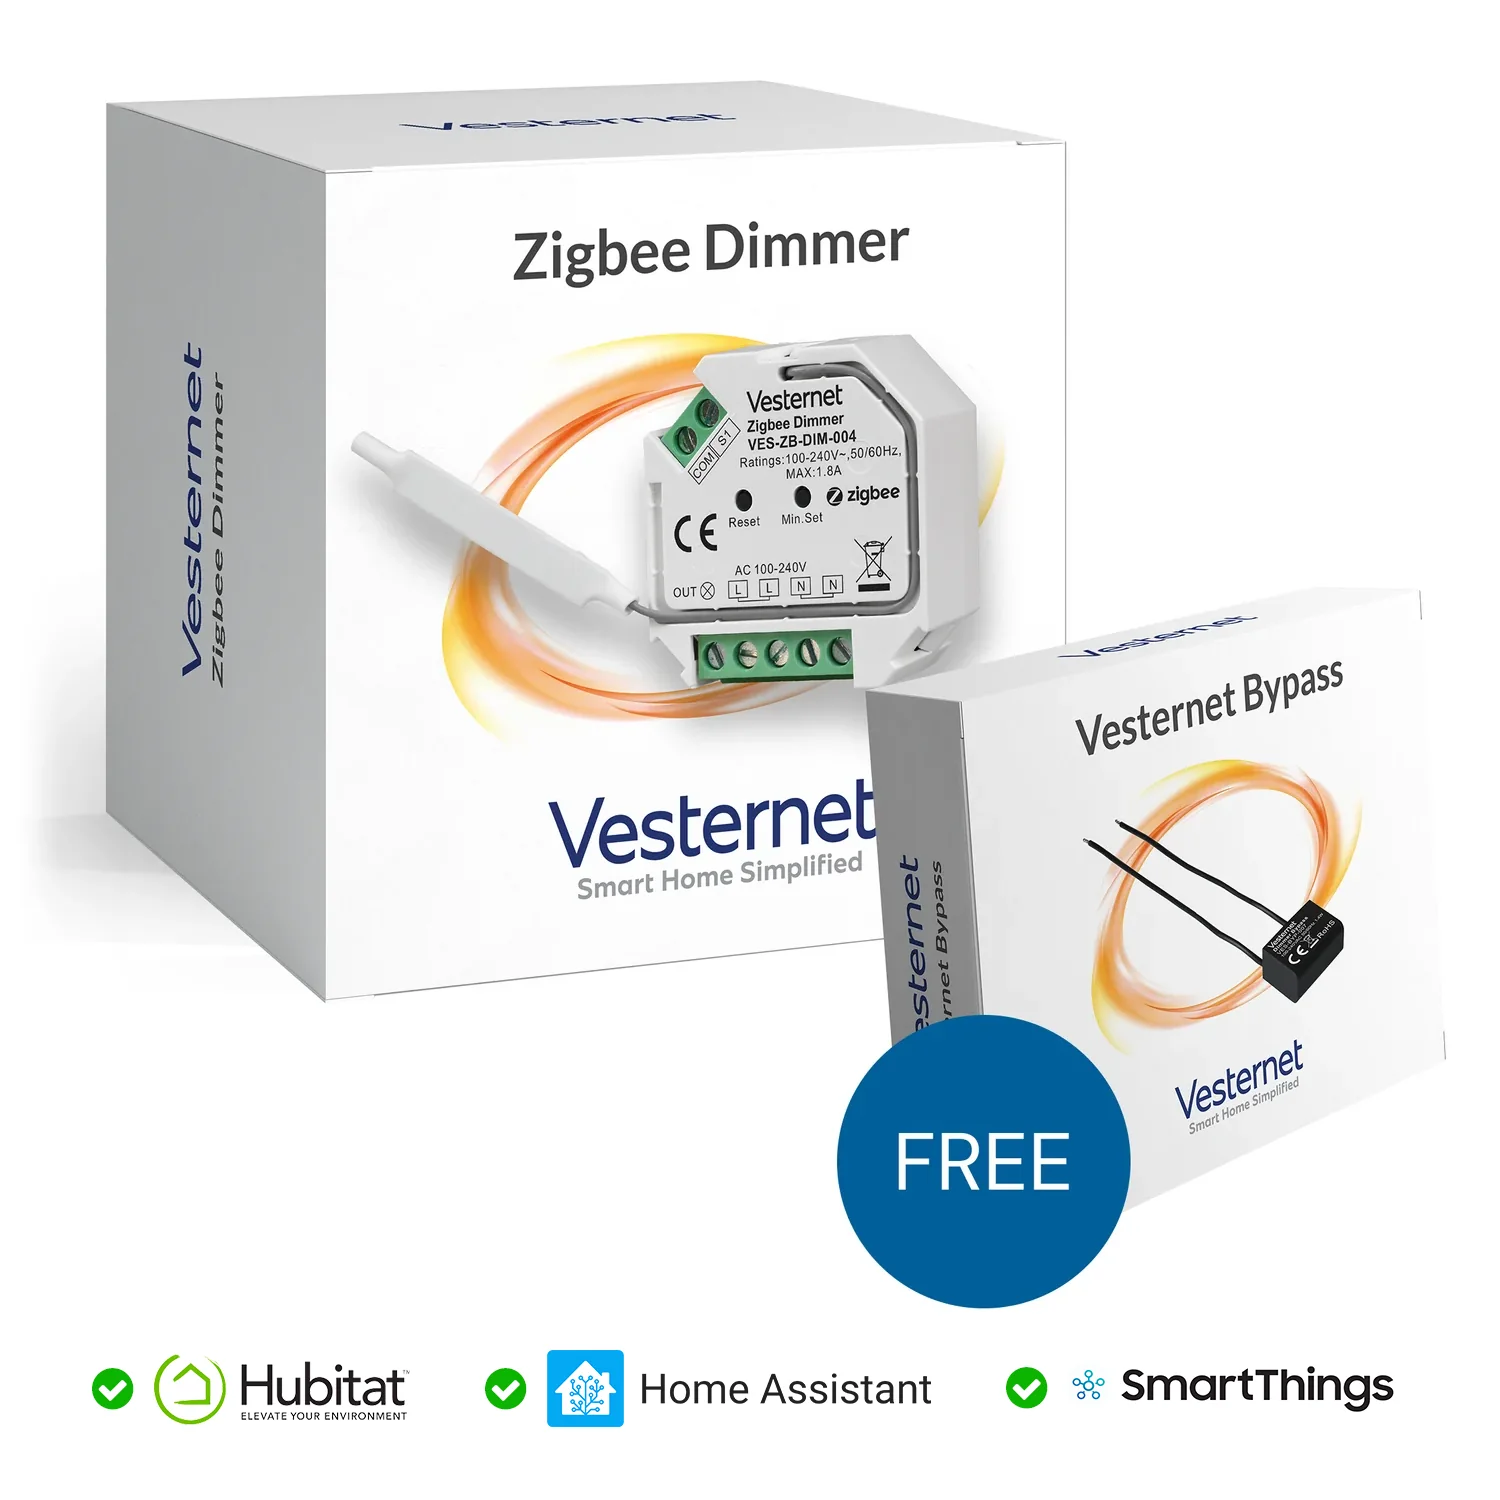 What is the compatibility of the Vesternet Zigbee Dimmer?